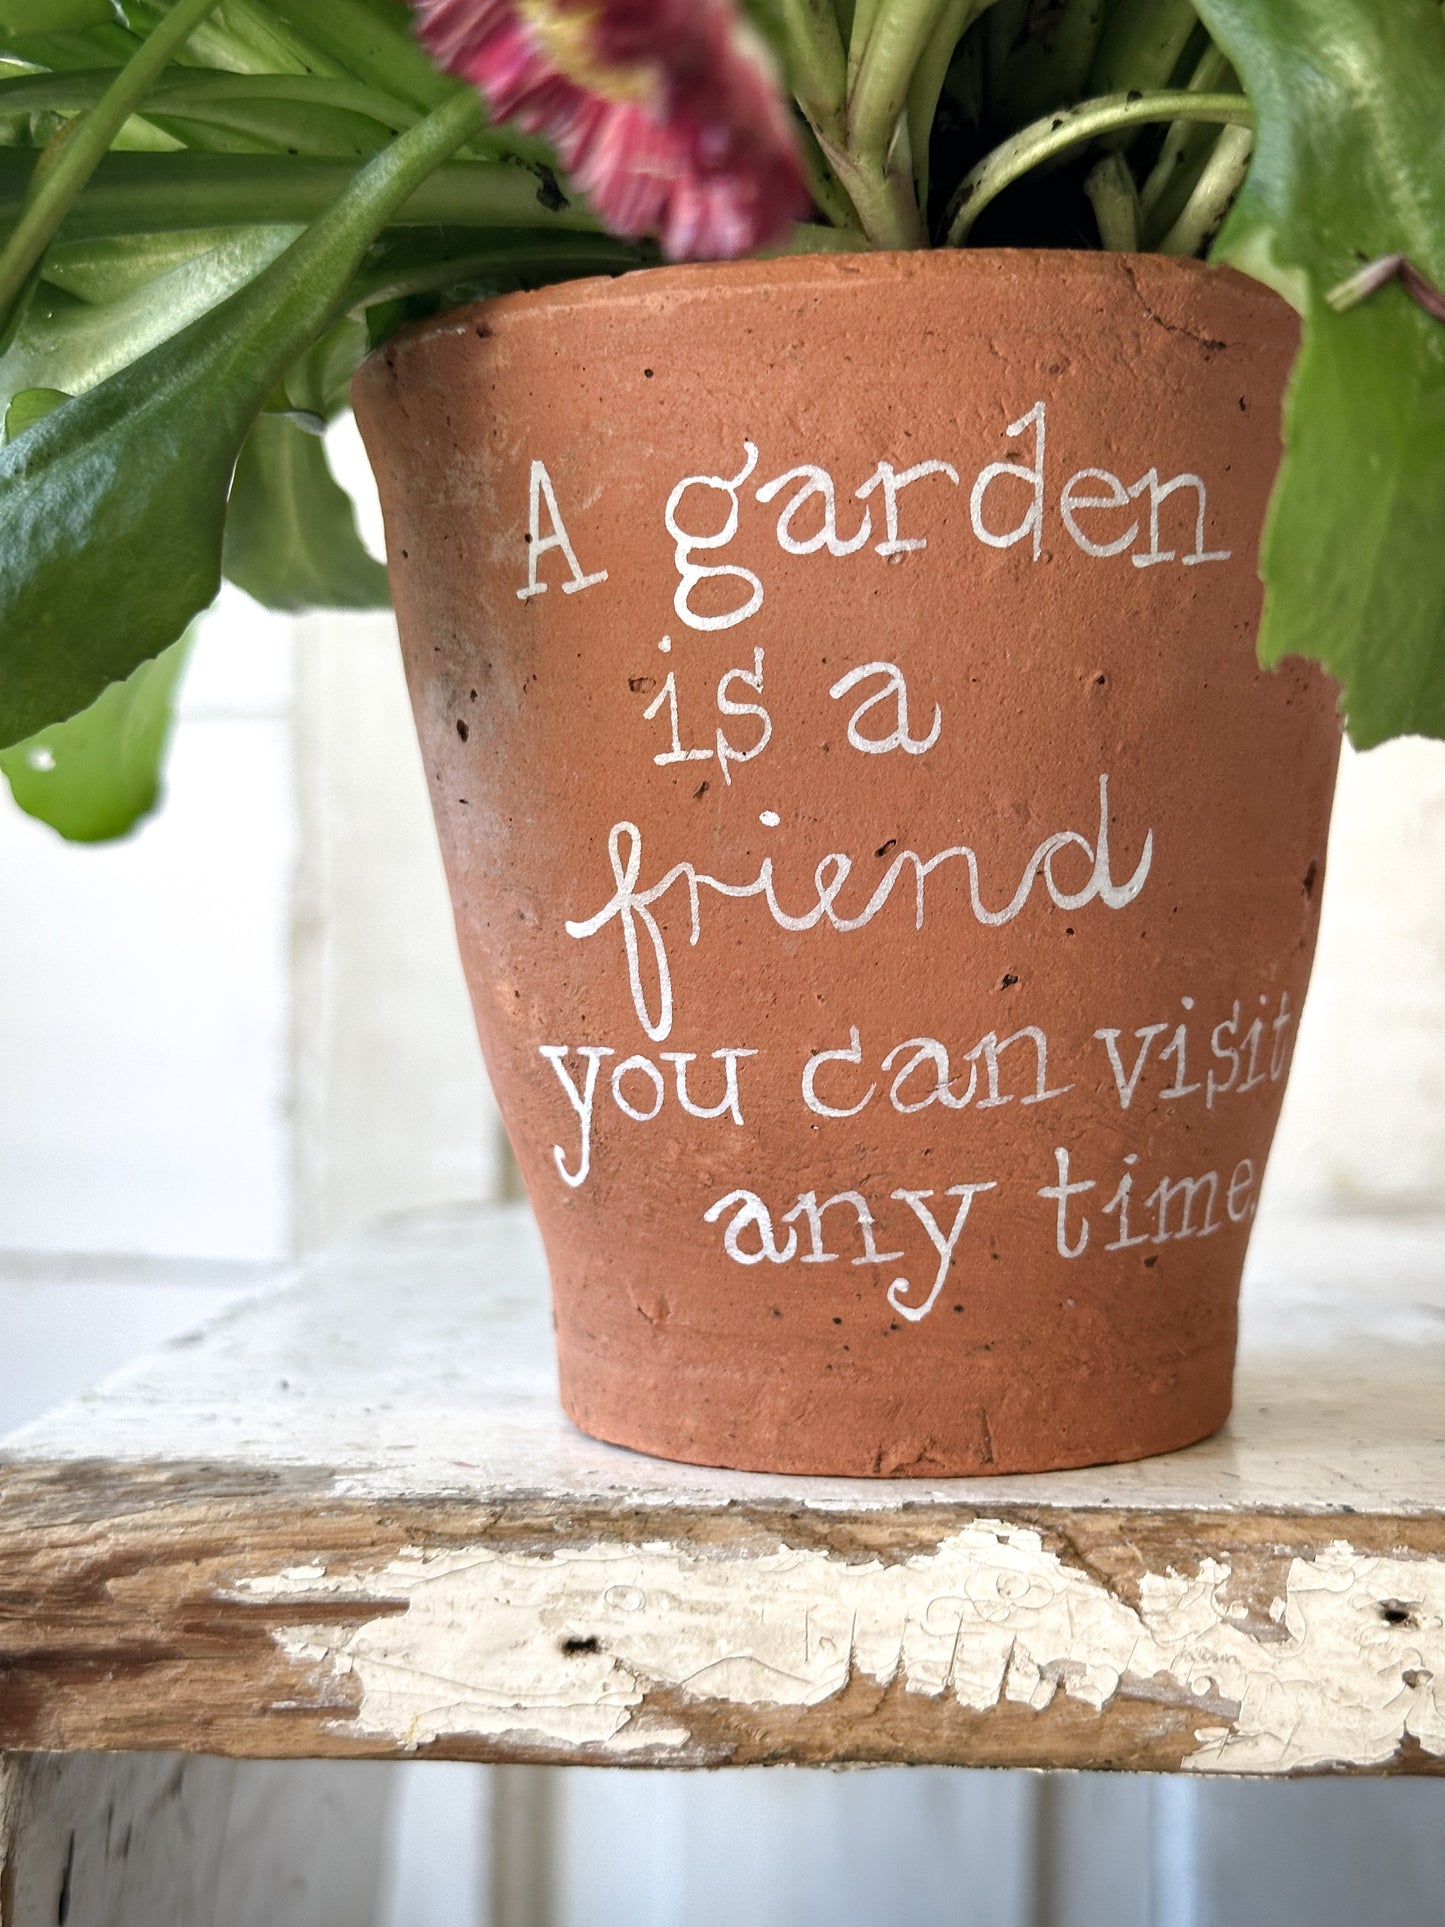 A Victorian terracotta pot with a quote